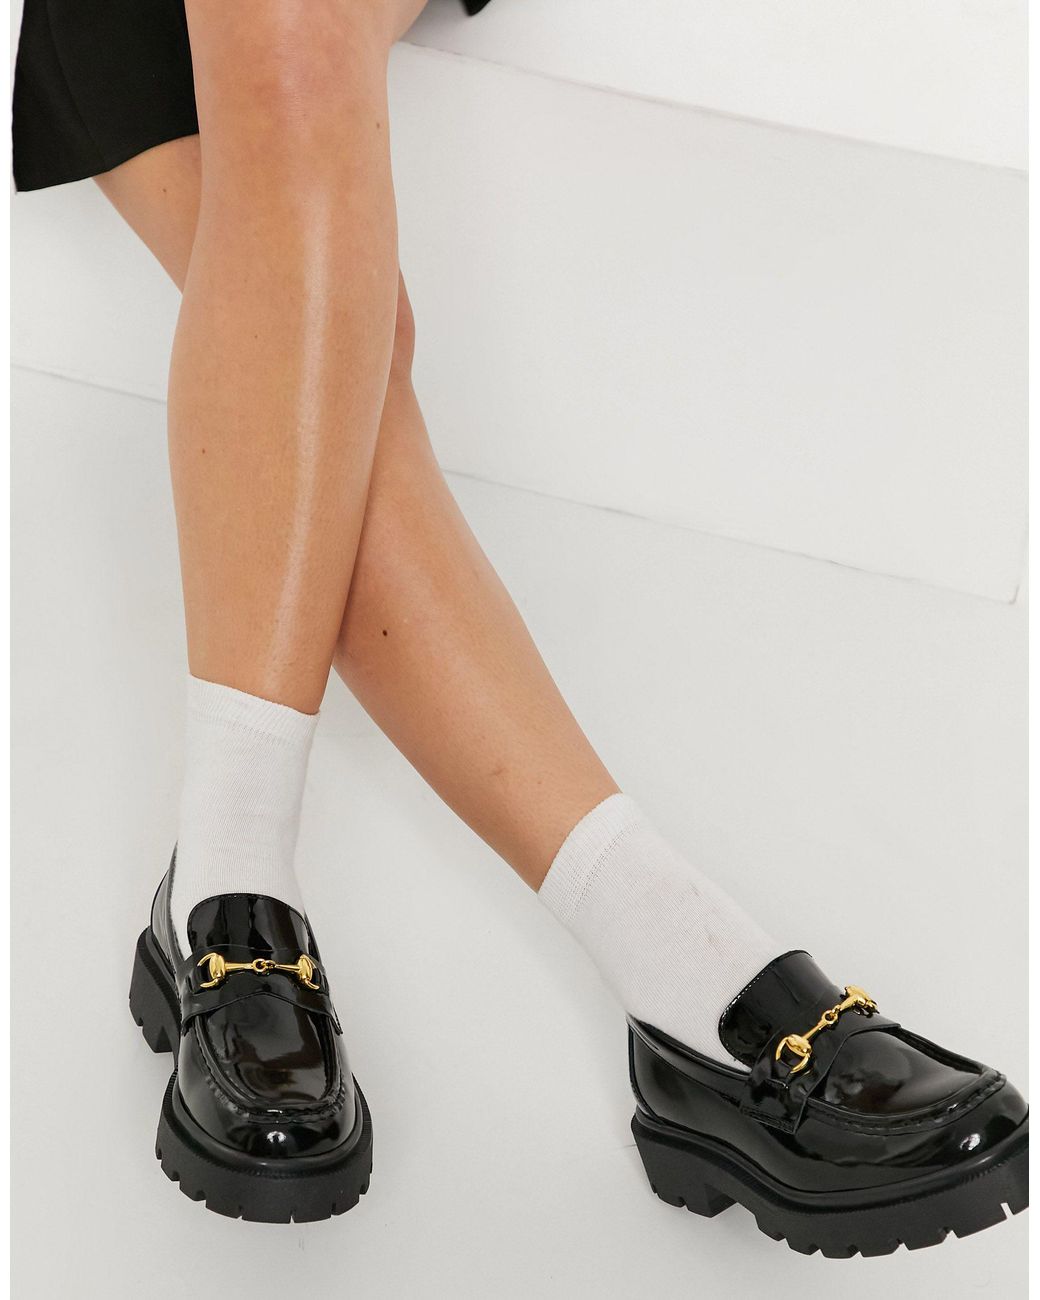 SELECTED Femme Patent Loafers With Gold Hardware in Black | Lyst